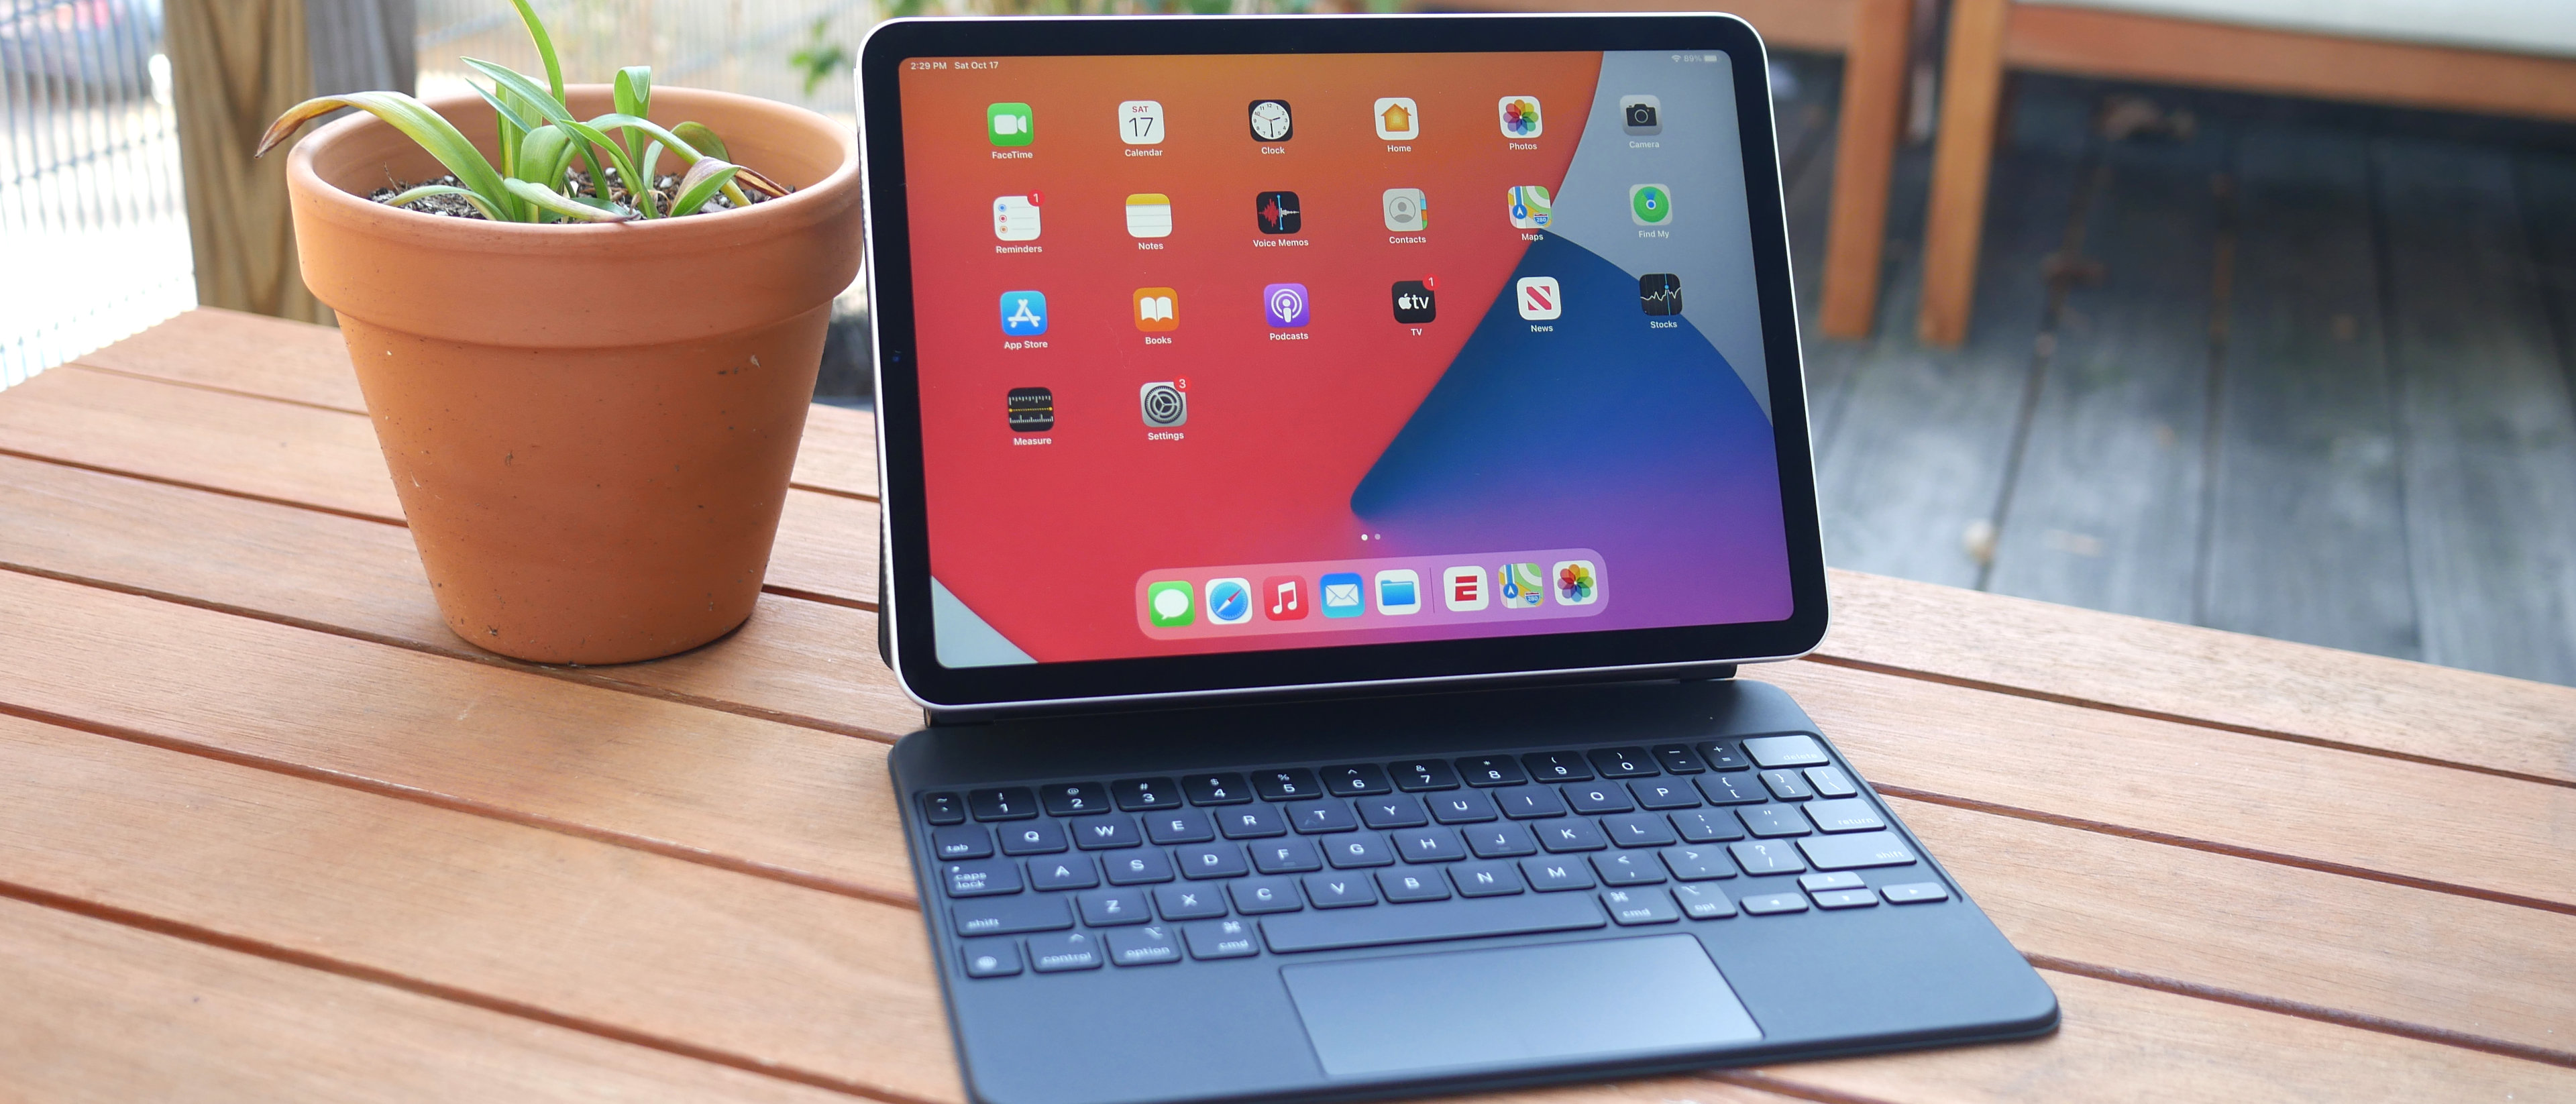 Apple iPad Air (2020) review: This is the one to buy | Laptop Mag